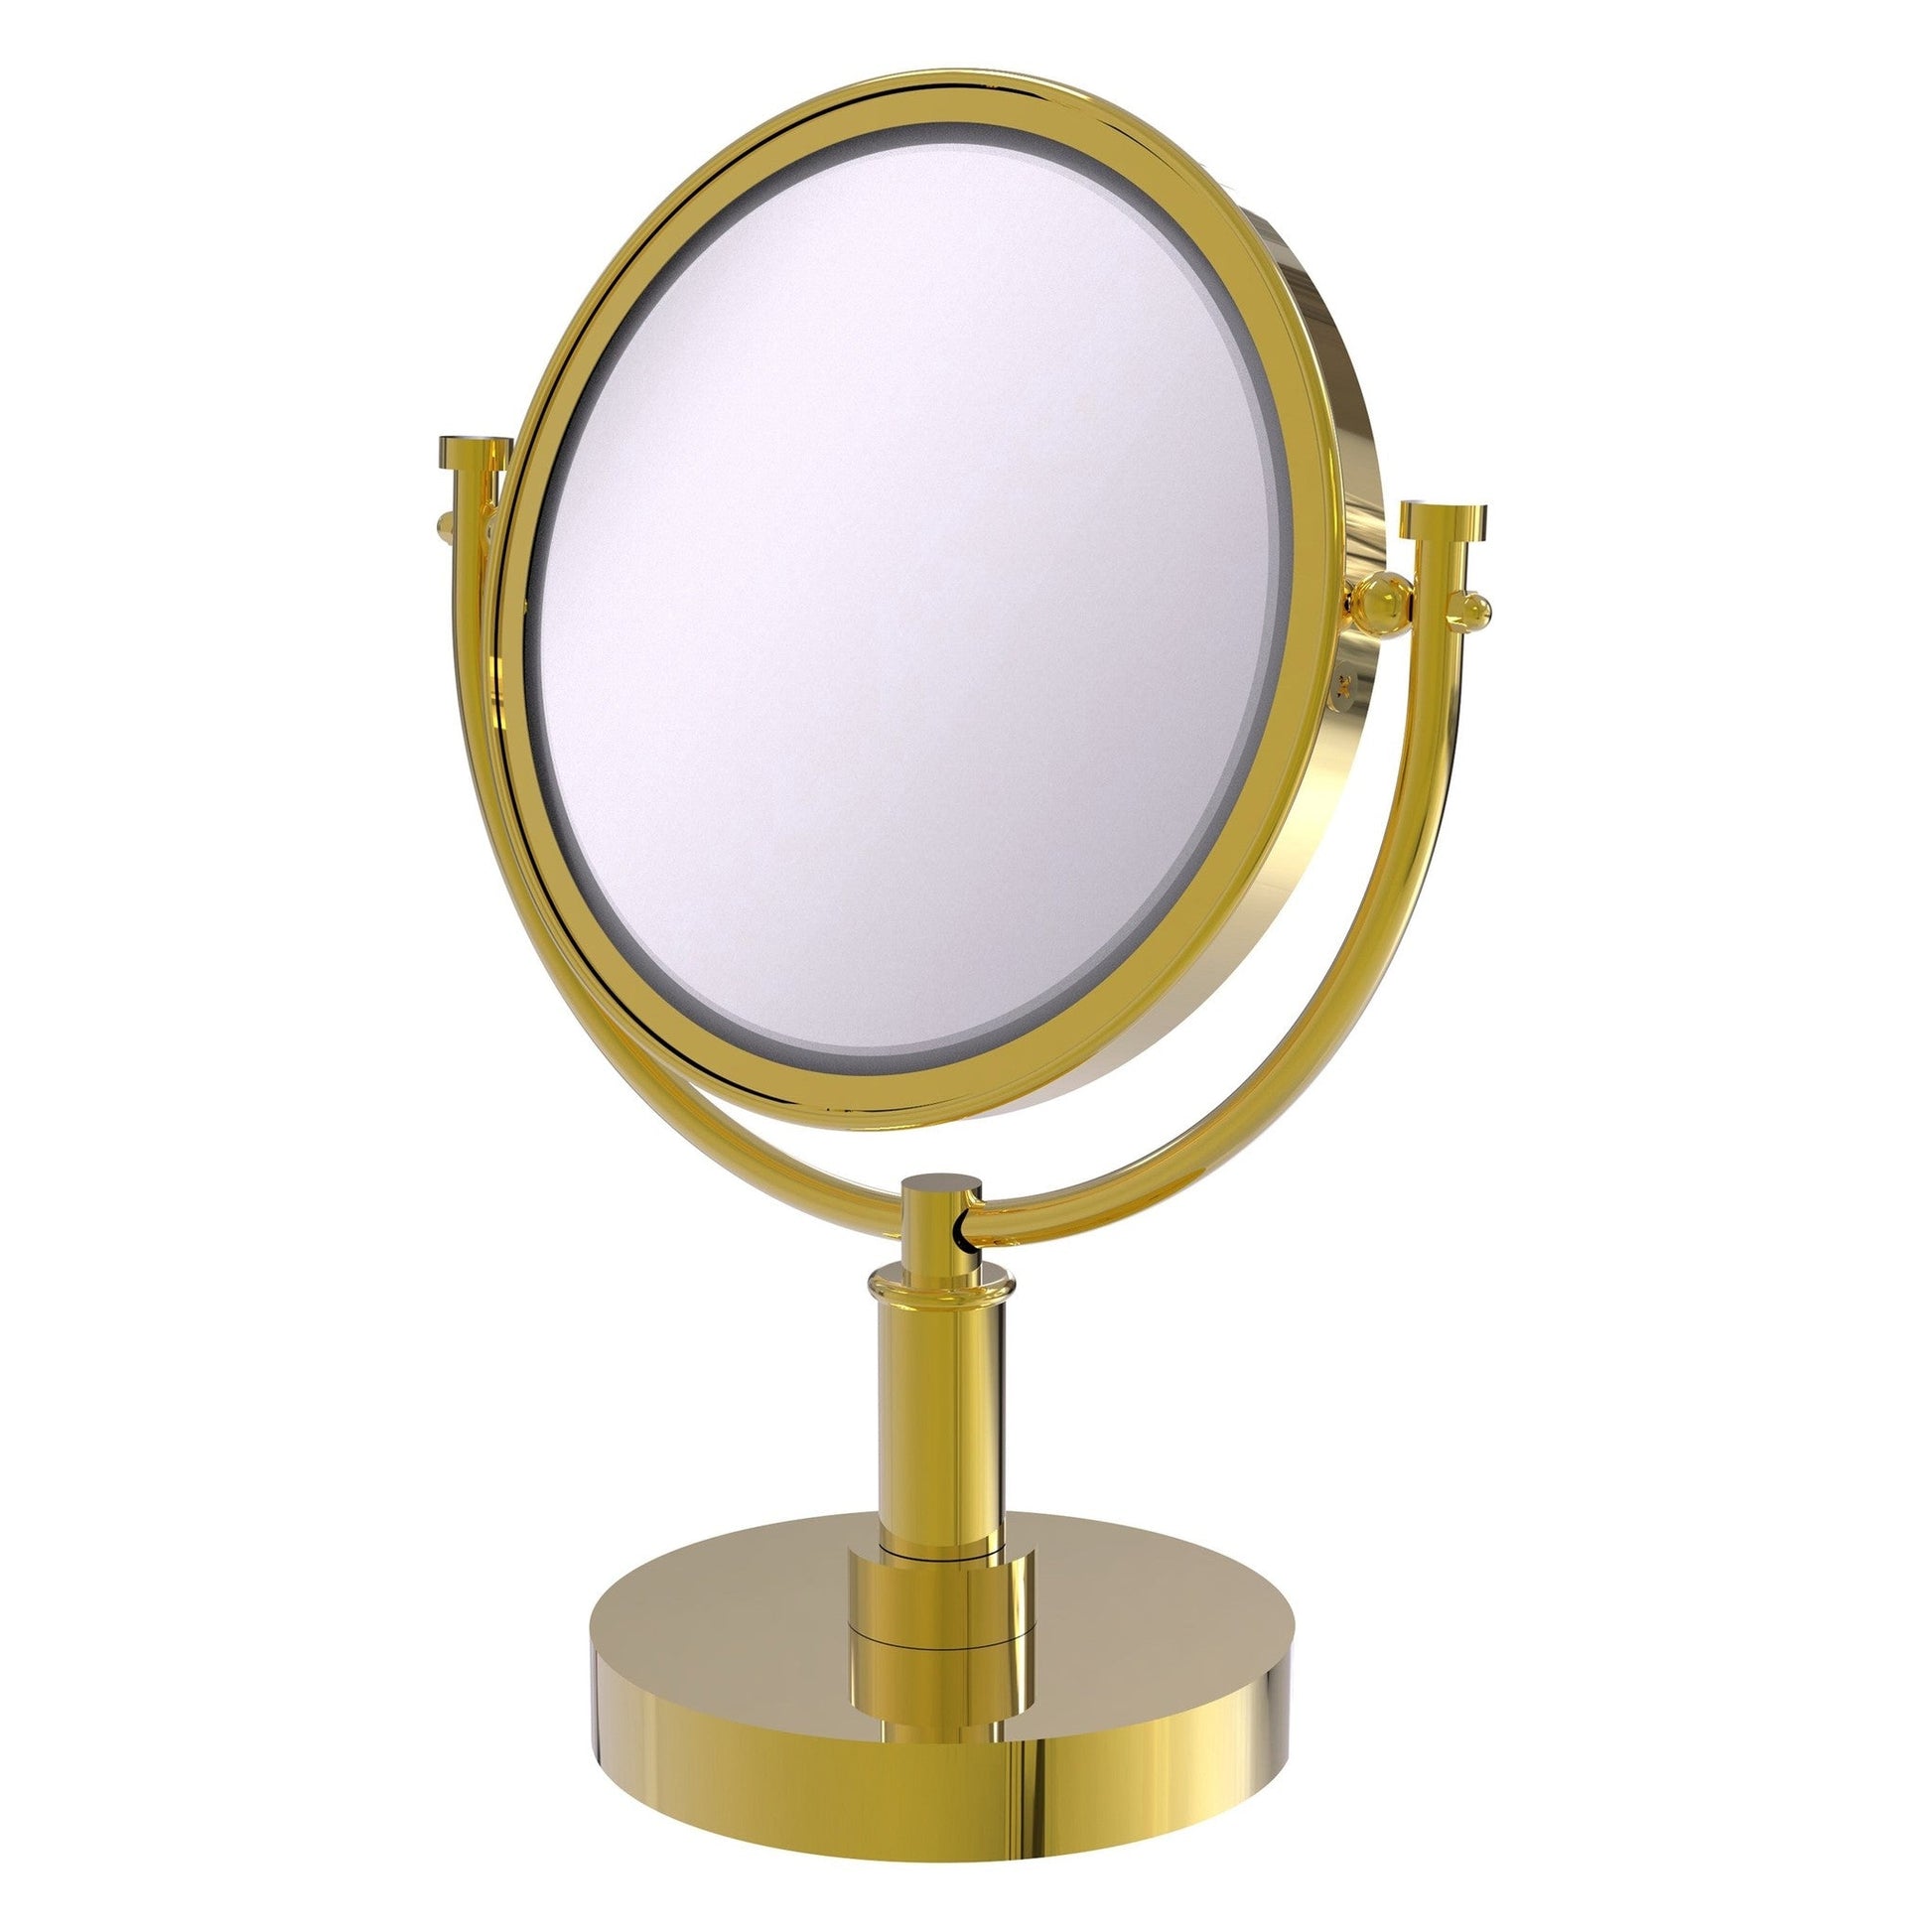 Allied Brass DM-4/2X 8" x 8" Polished Brass Solid Brass Vanity Top Make-Up Mirror 2X Magnification